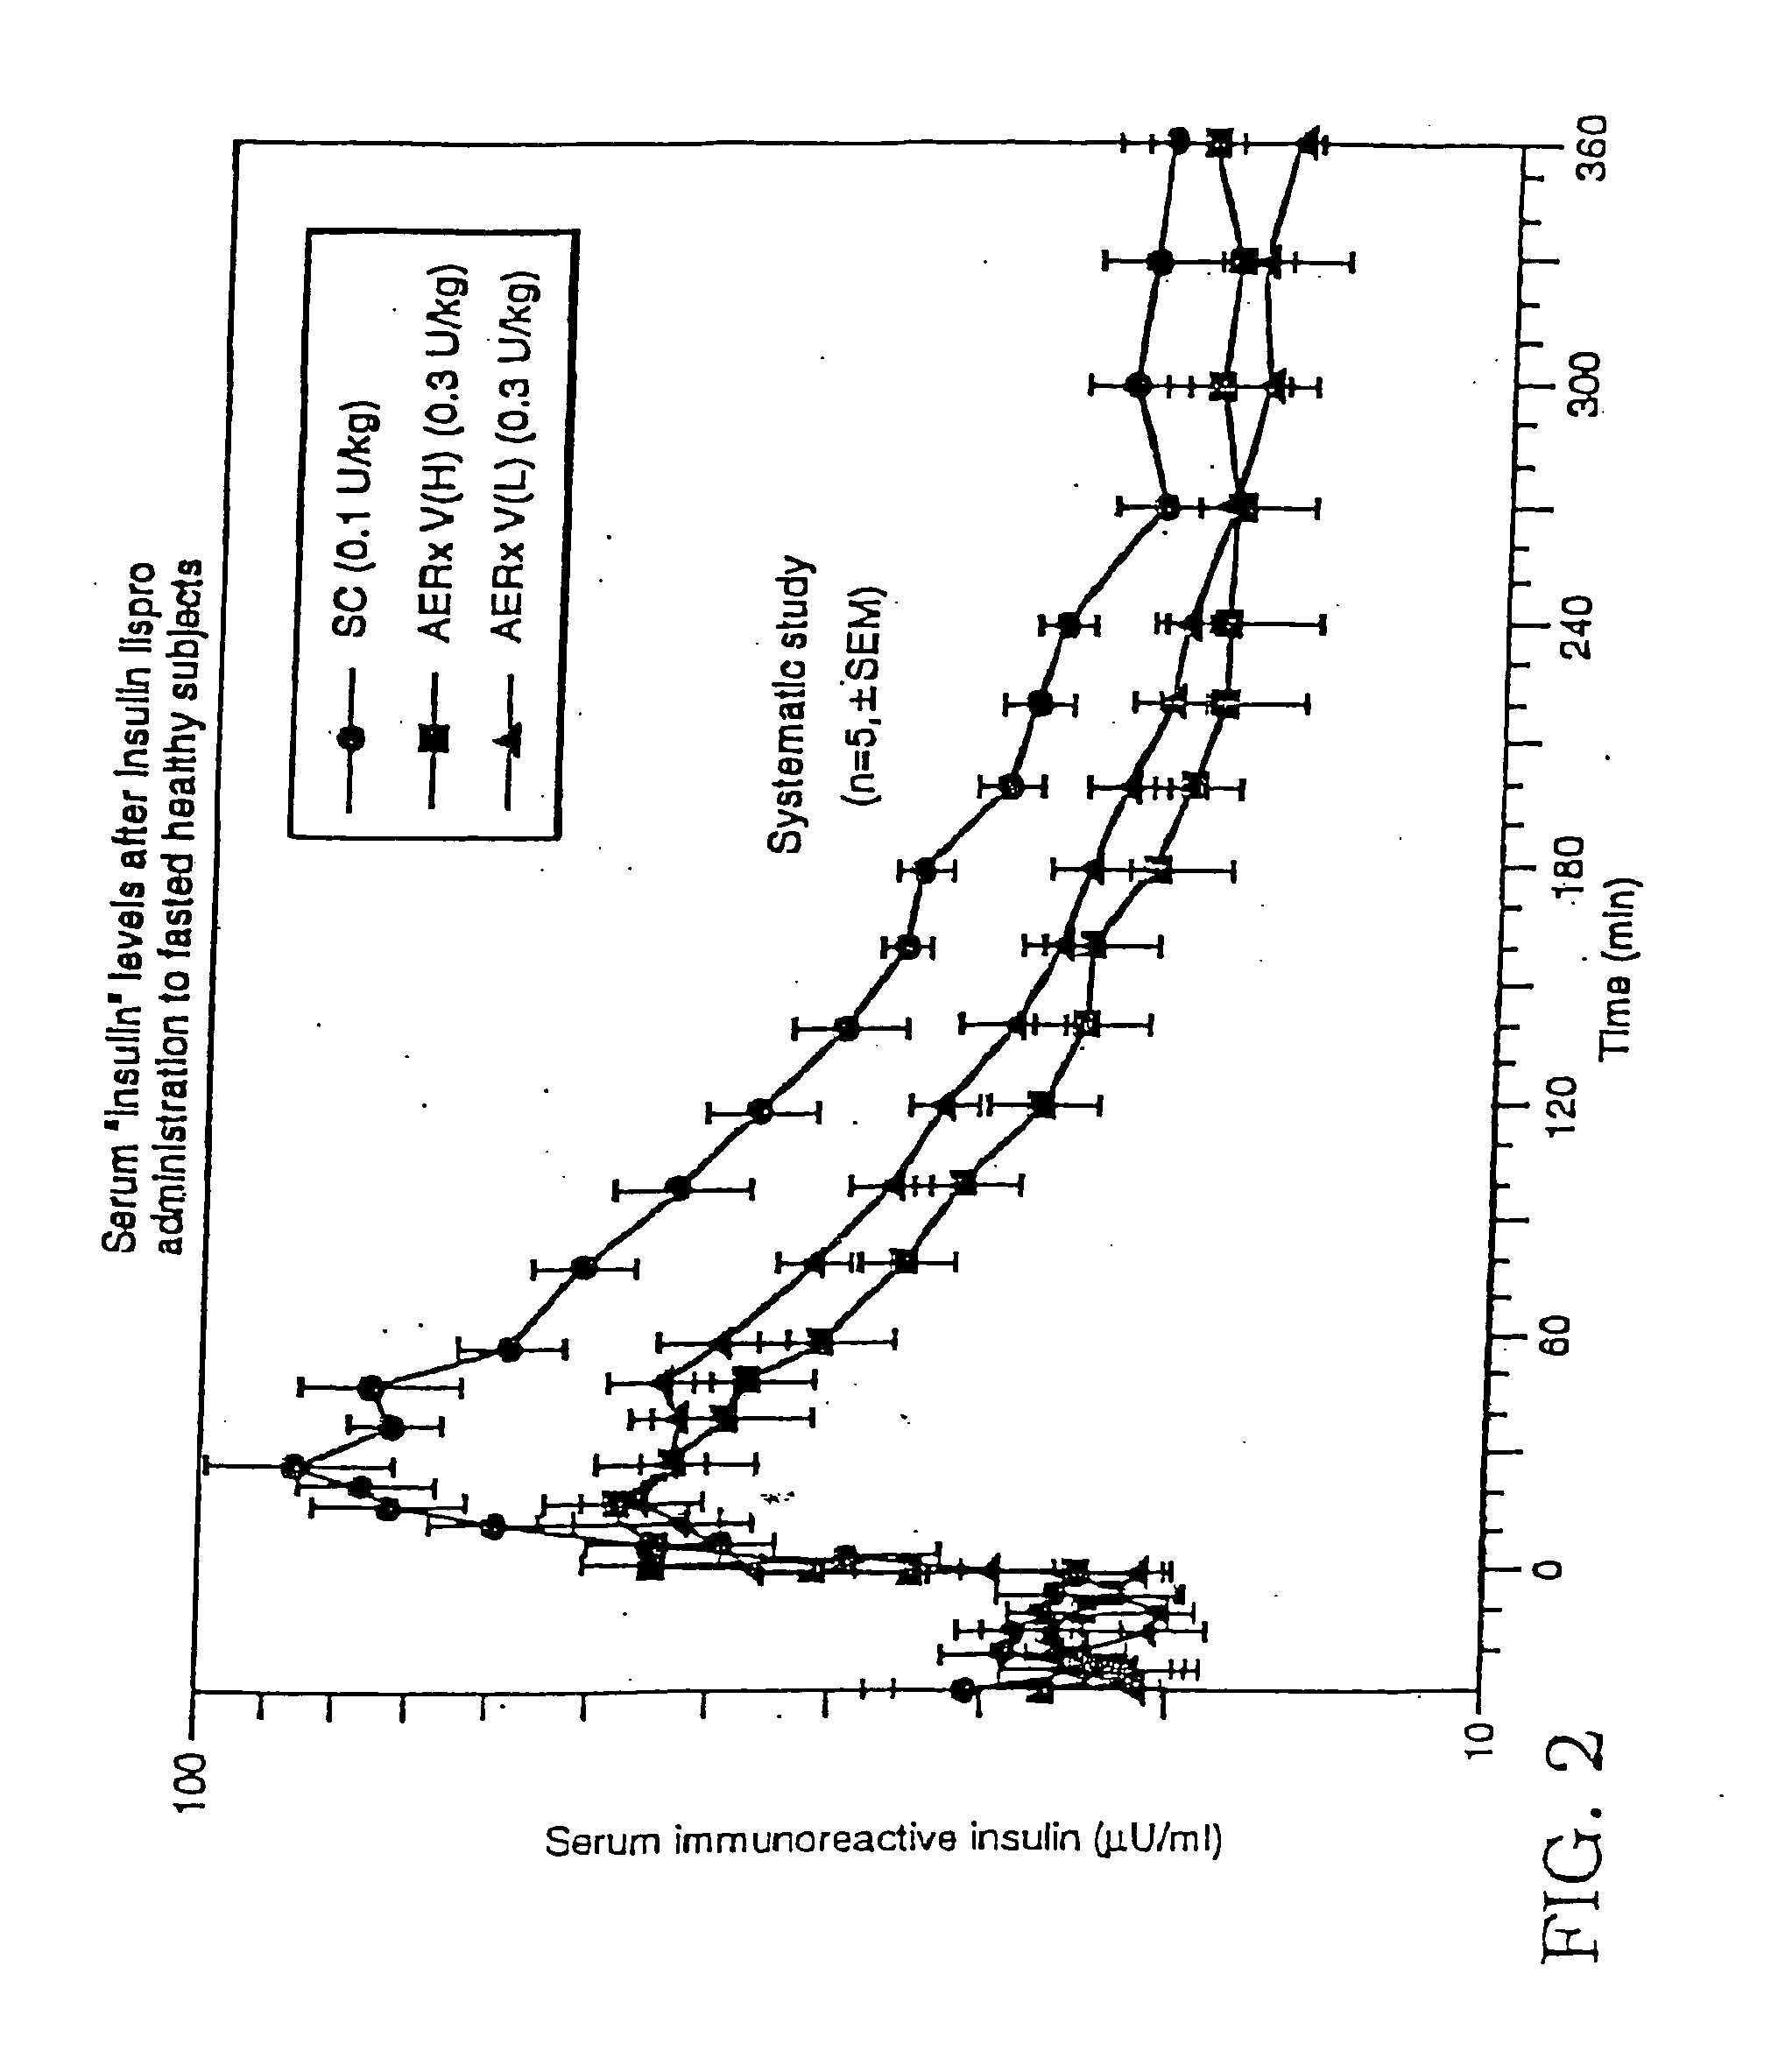 Method of use of monomeric insulin as a means for improving the reproducibility of inhaled insulin